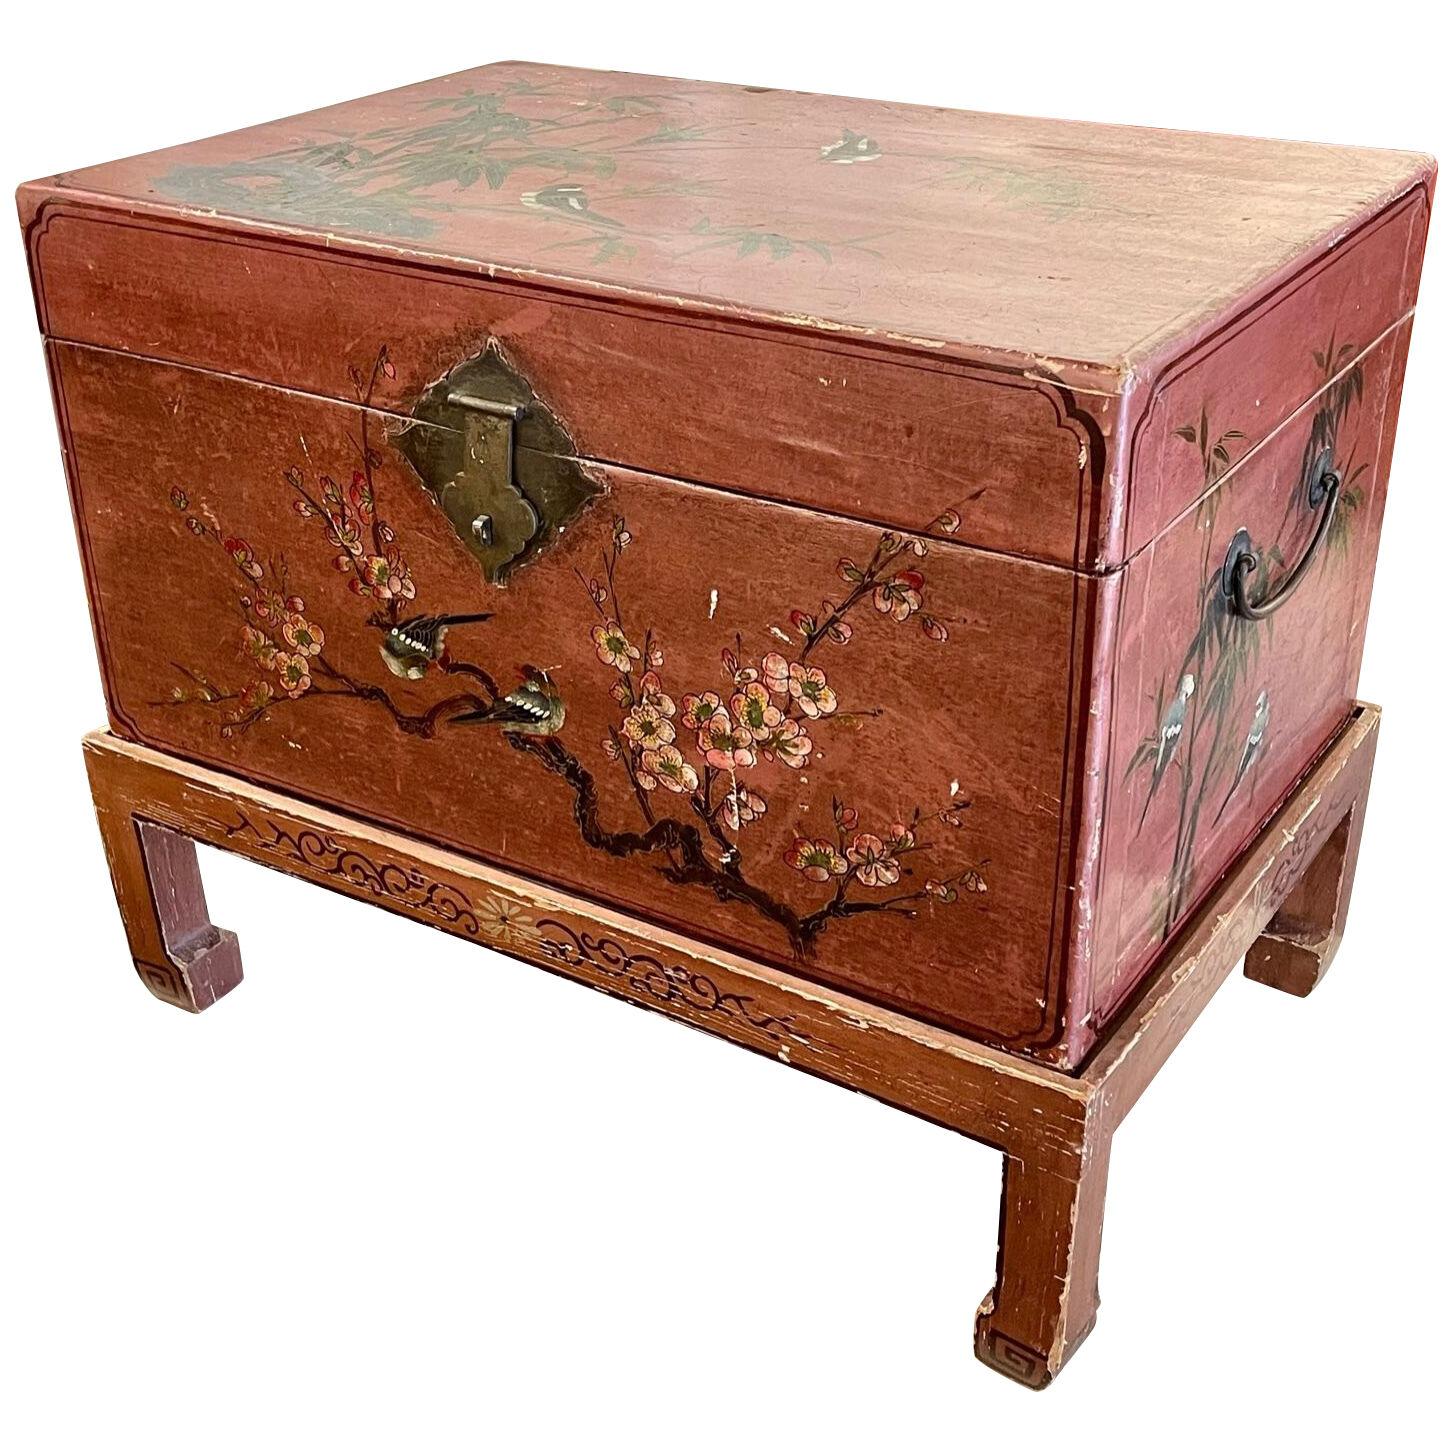 Vintage Chinese Hand Painted Trunk on Stand